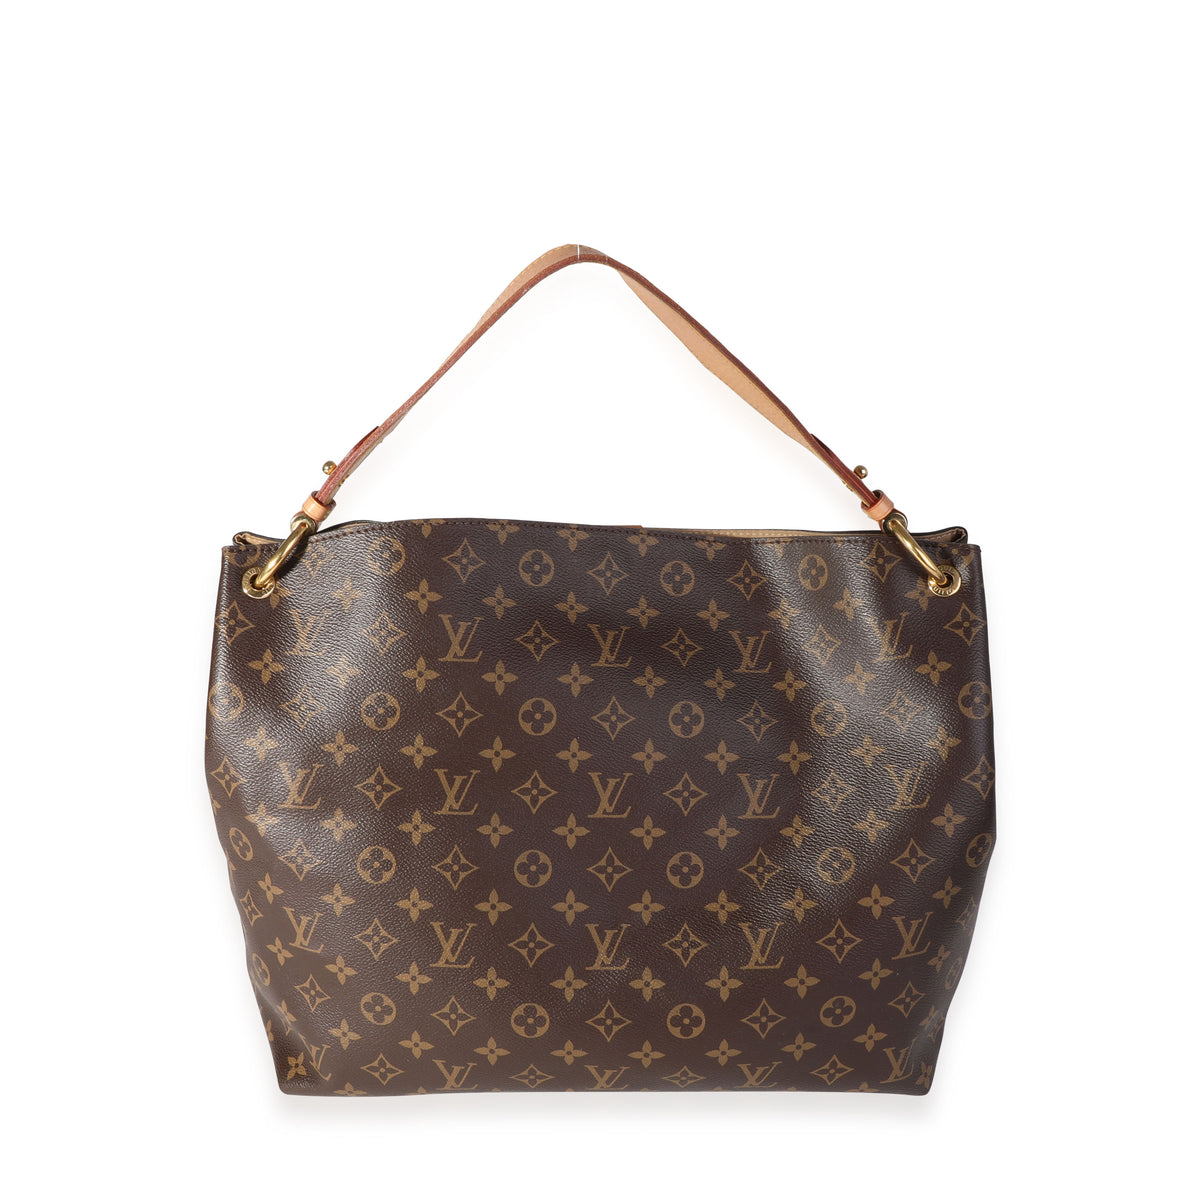 Louis Vuitton  ADVICE PLEASE? I already have the Graceful MM in